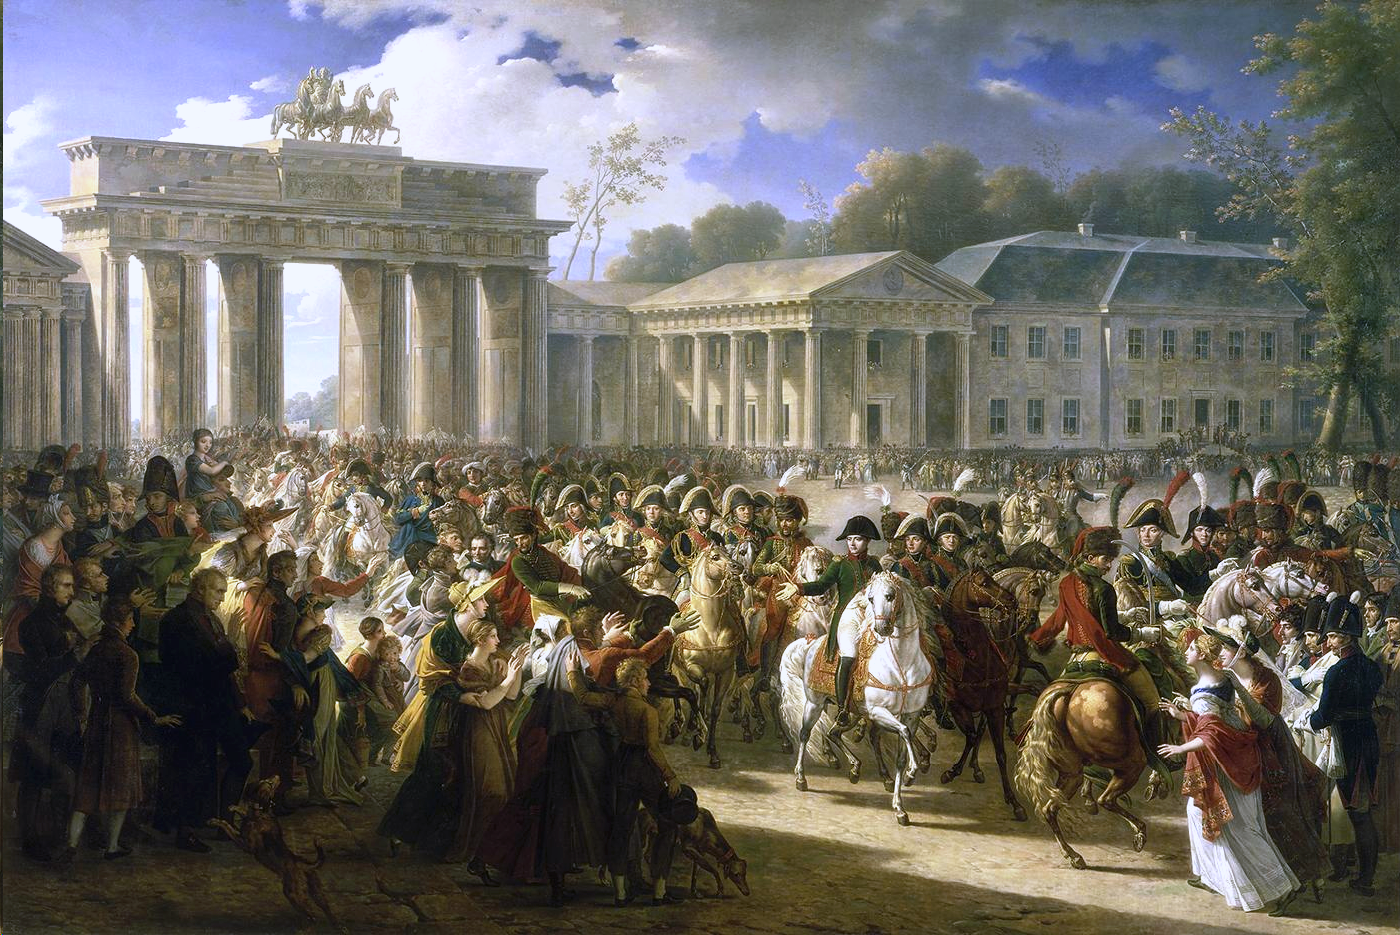 Napoleon in Berlin. After defeating Prussian forces at Jena, the French Army entered Berlin on 27 October 1806. 